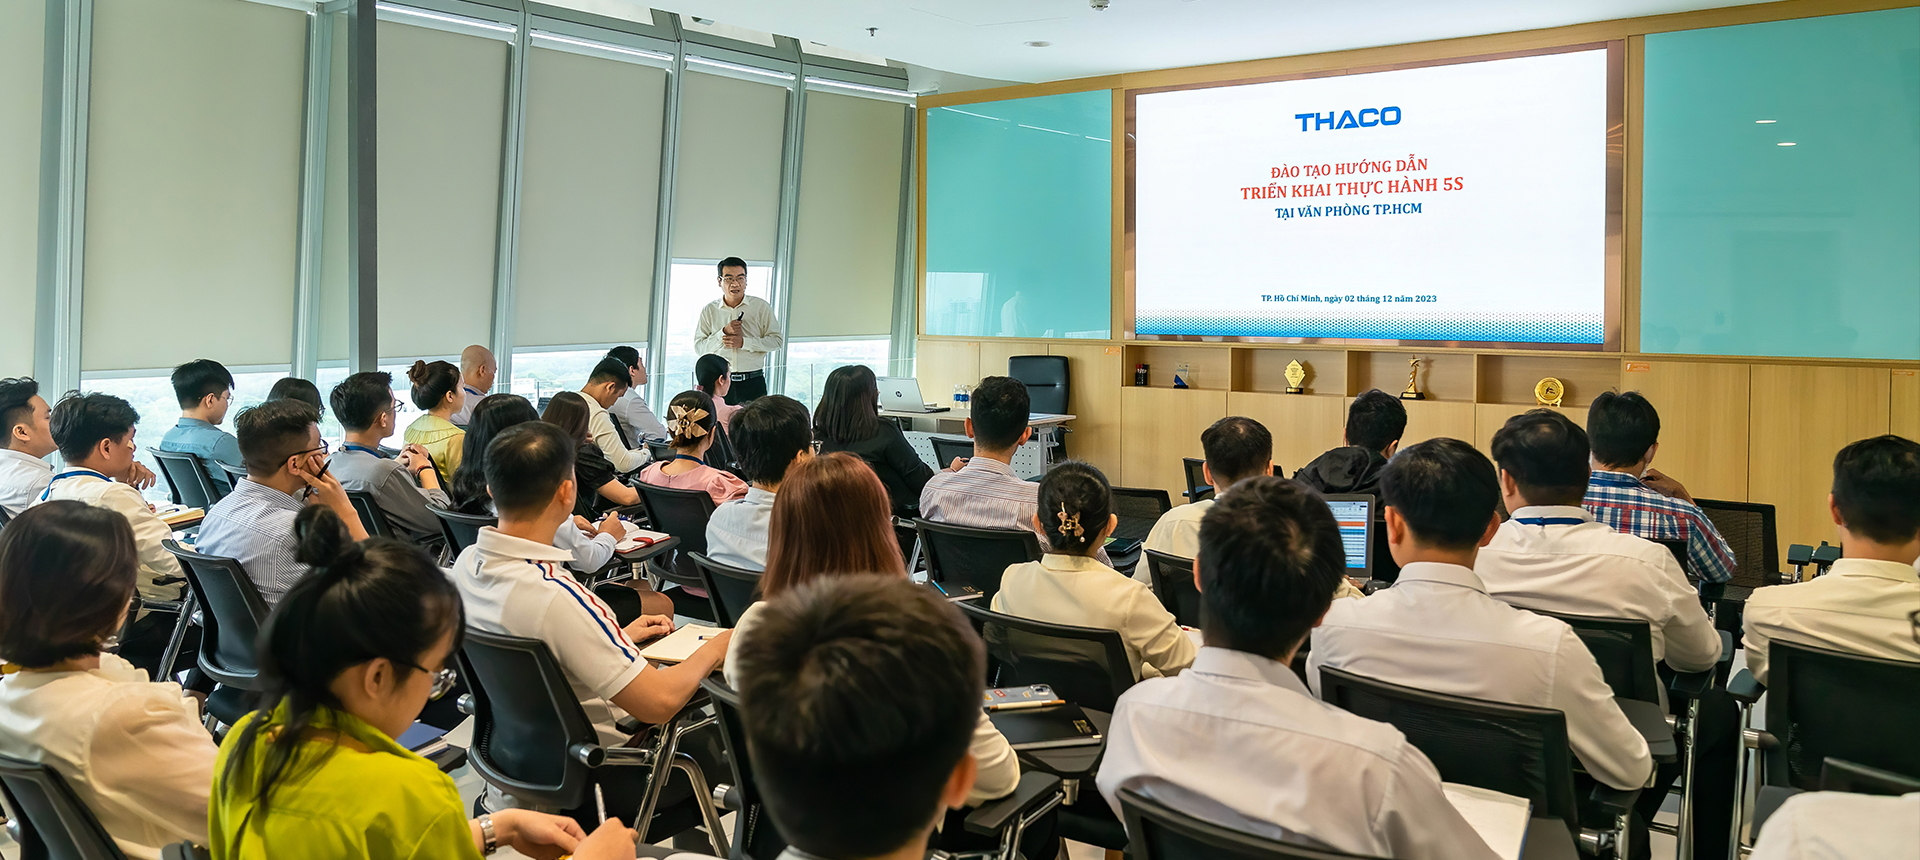 THACO implements 5S at Sadora Office